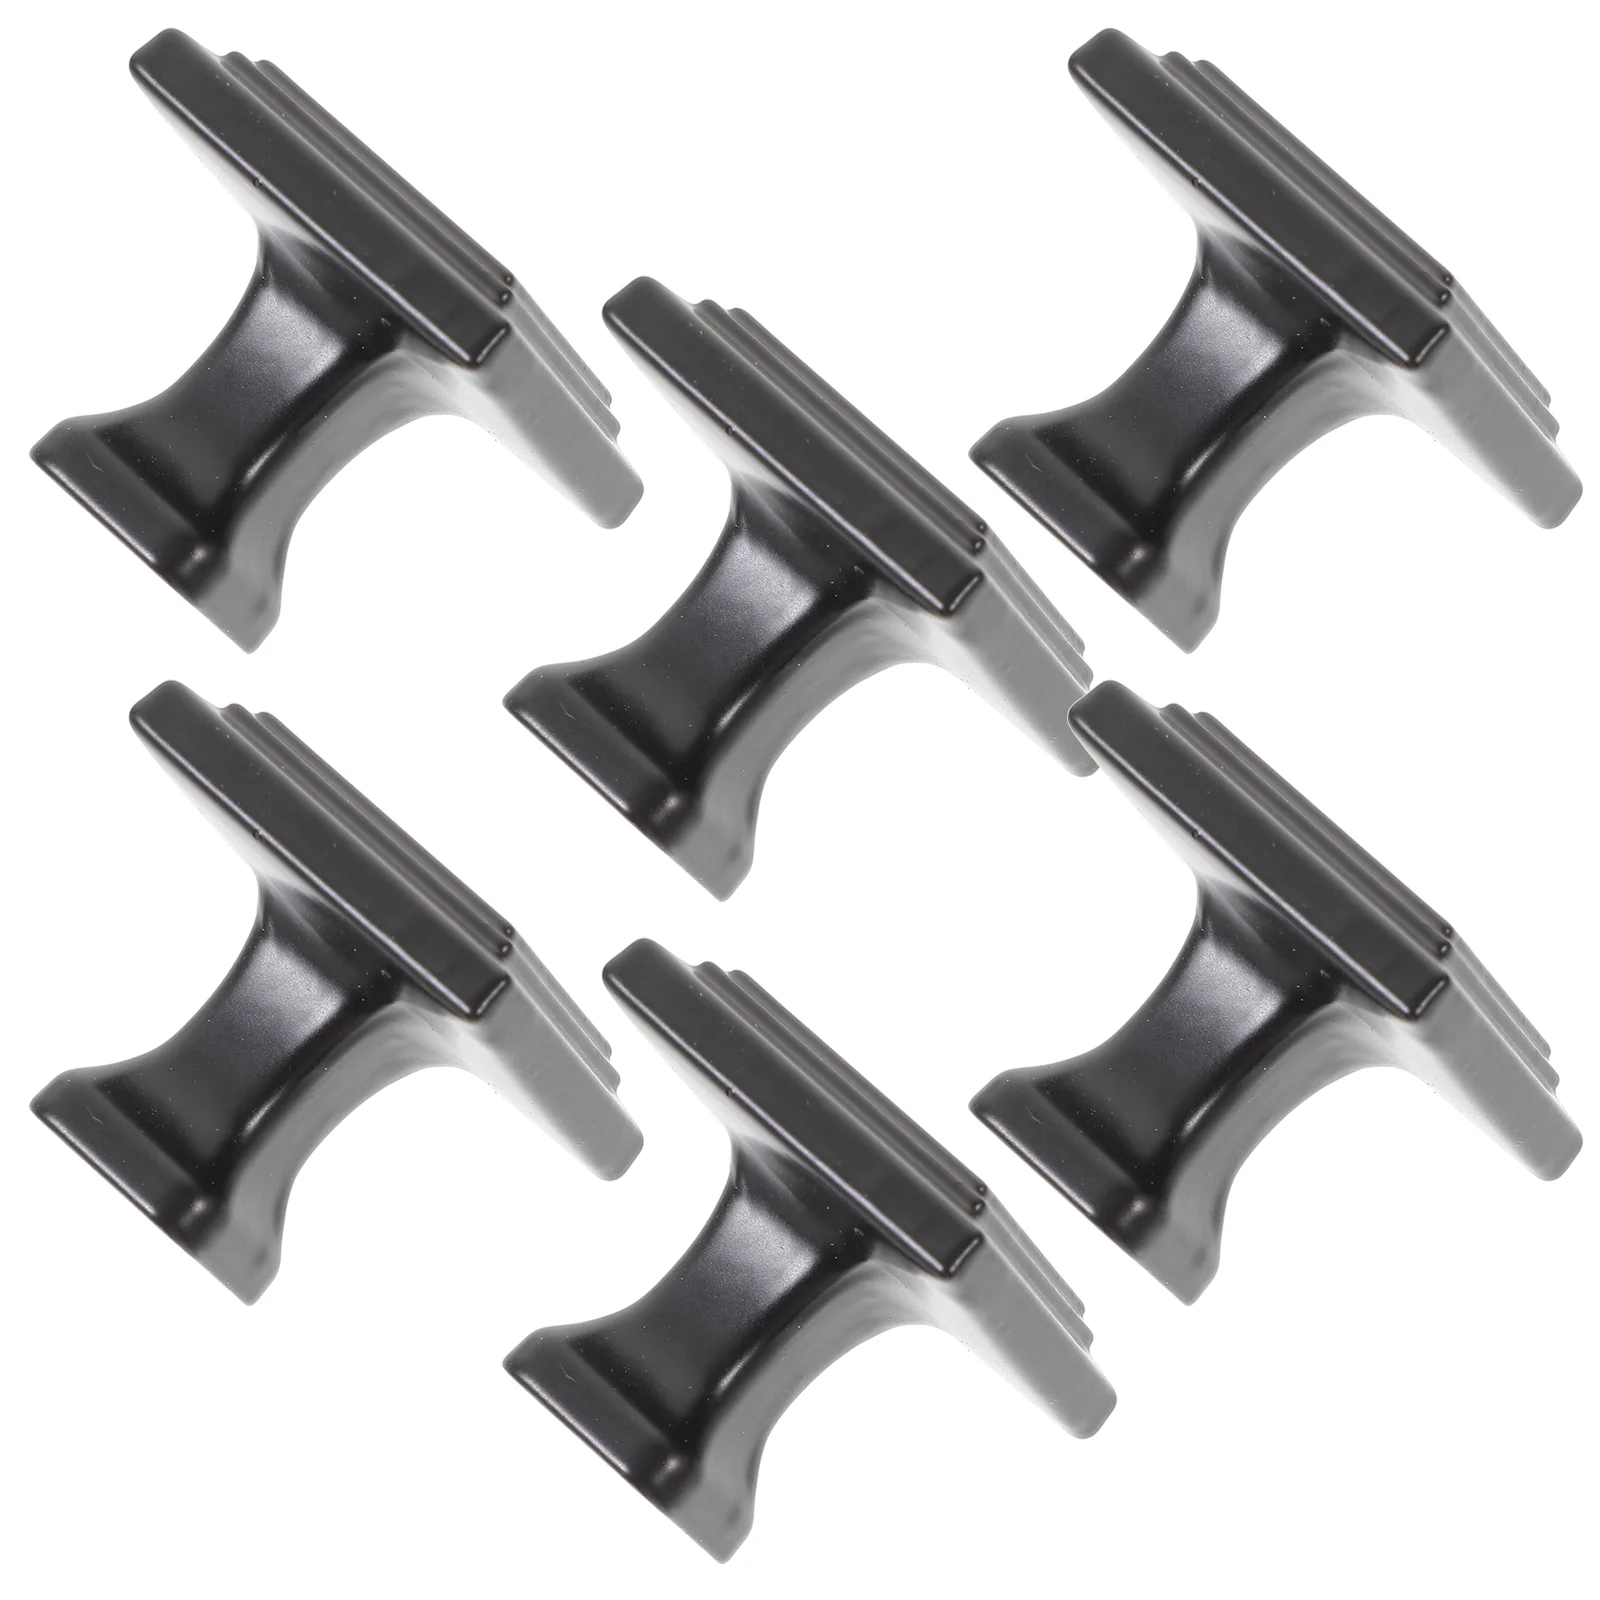 

Cabinet Knobs Handle Pulls Square Knobs for Kitchen Cabinets Drawers Dressers